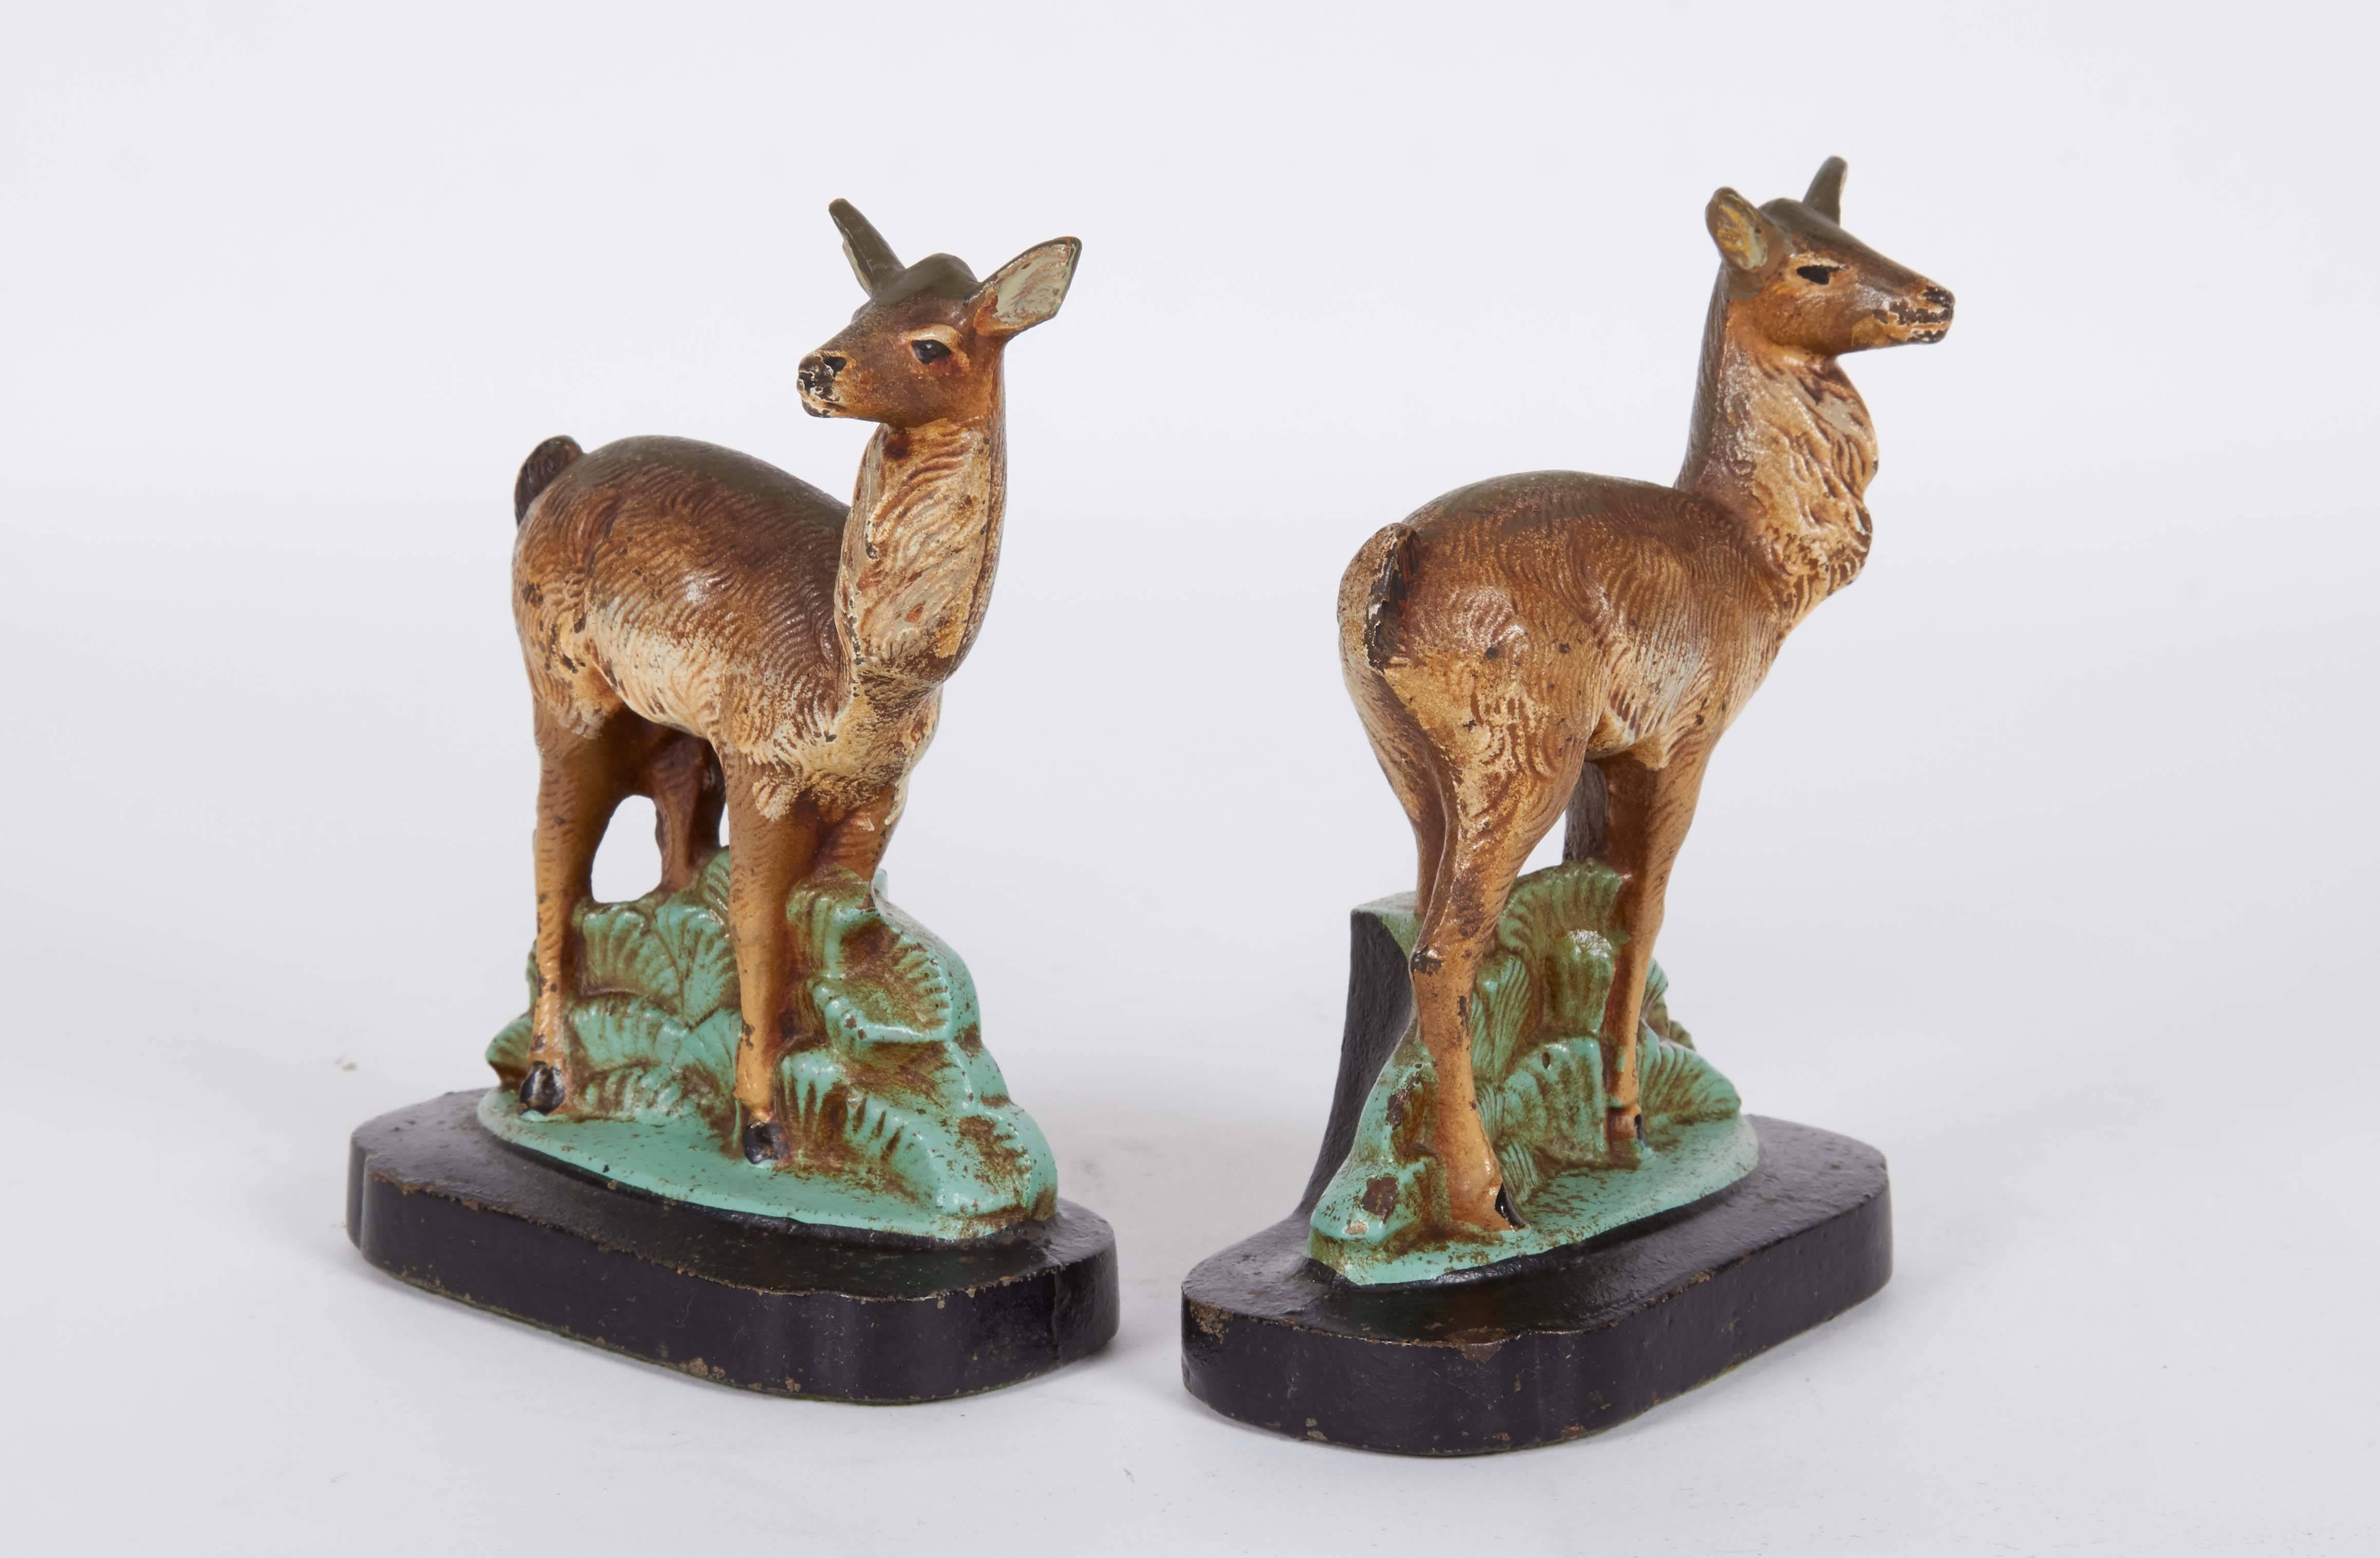 A pair of Art Deco era figurine bookends by Hubley, produced circa 1940s, each in cast iron, depicting a doe. Markings include number '399' to bases of either figure. These figures remain in very good vintage condition, wear consistent with age.